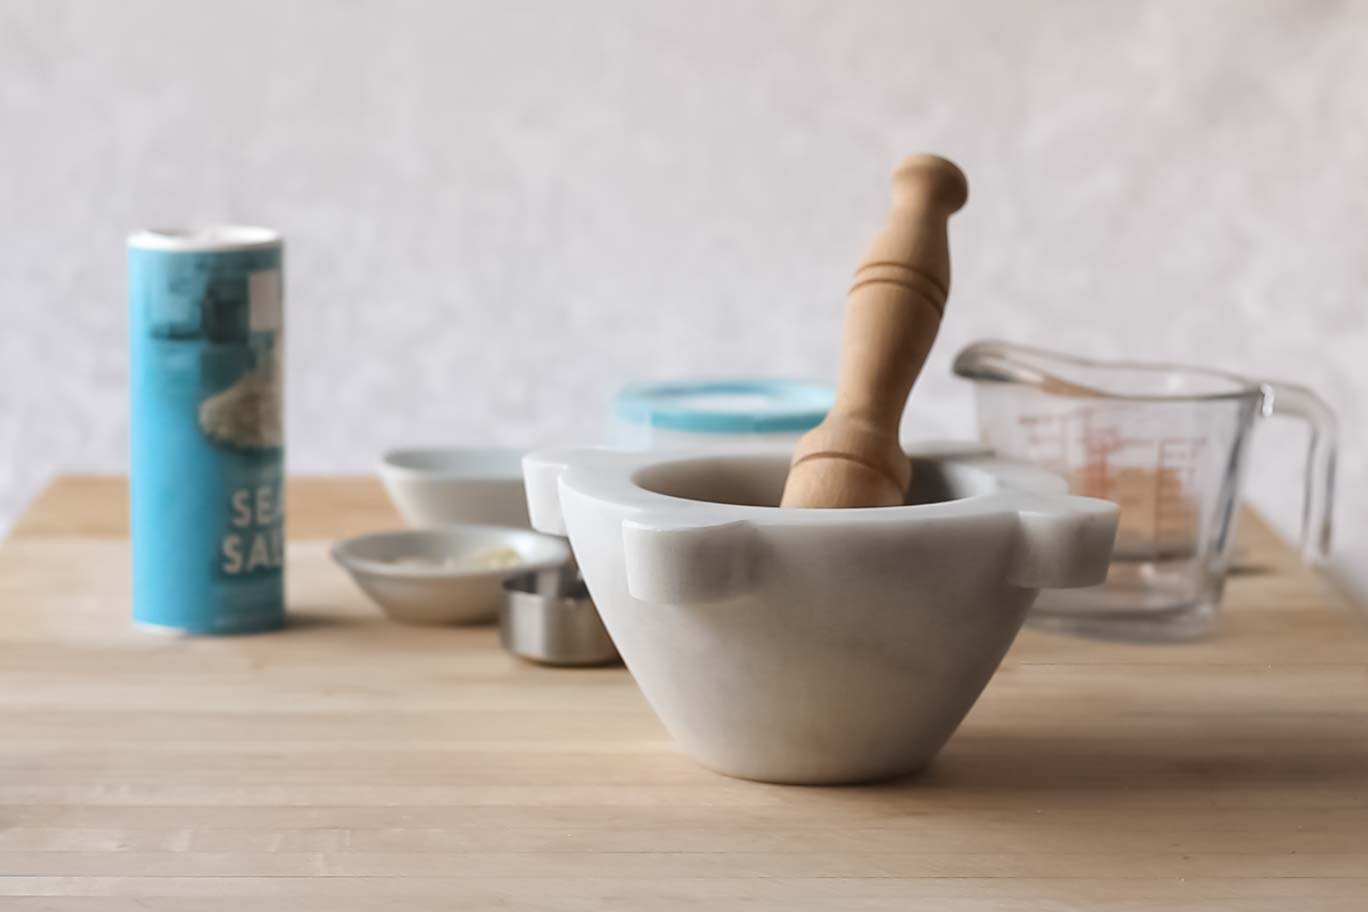 Marble mortar & pestle on a cutting board with prep tools and ingredients behind